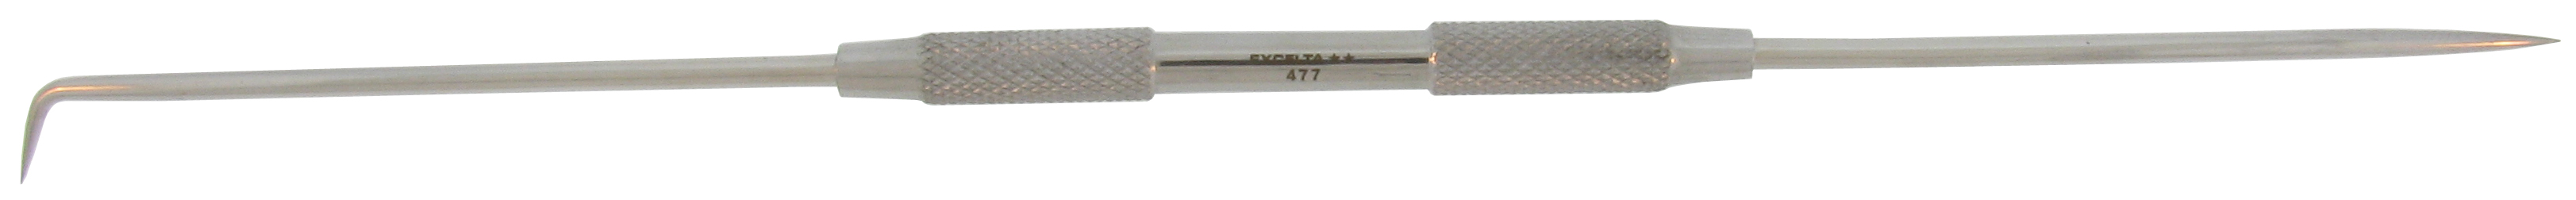 Excelta 477 8.5inch Double Ended Bent Scribe